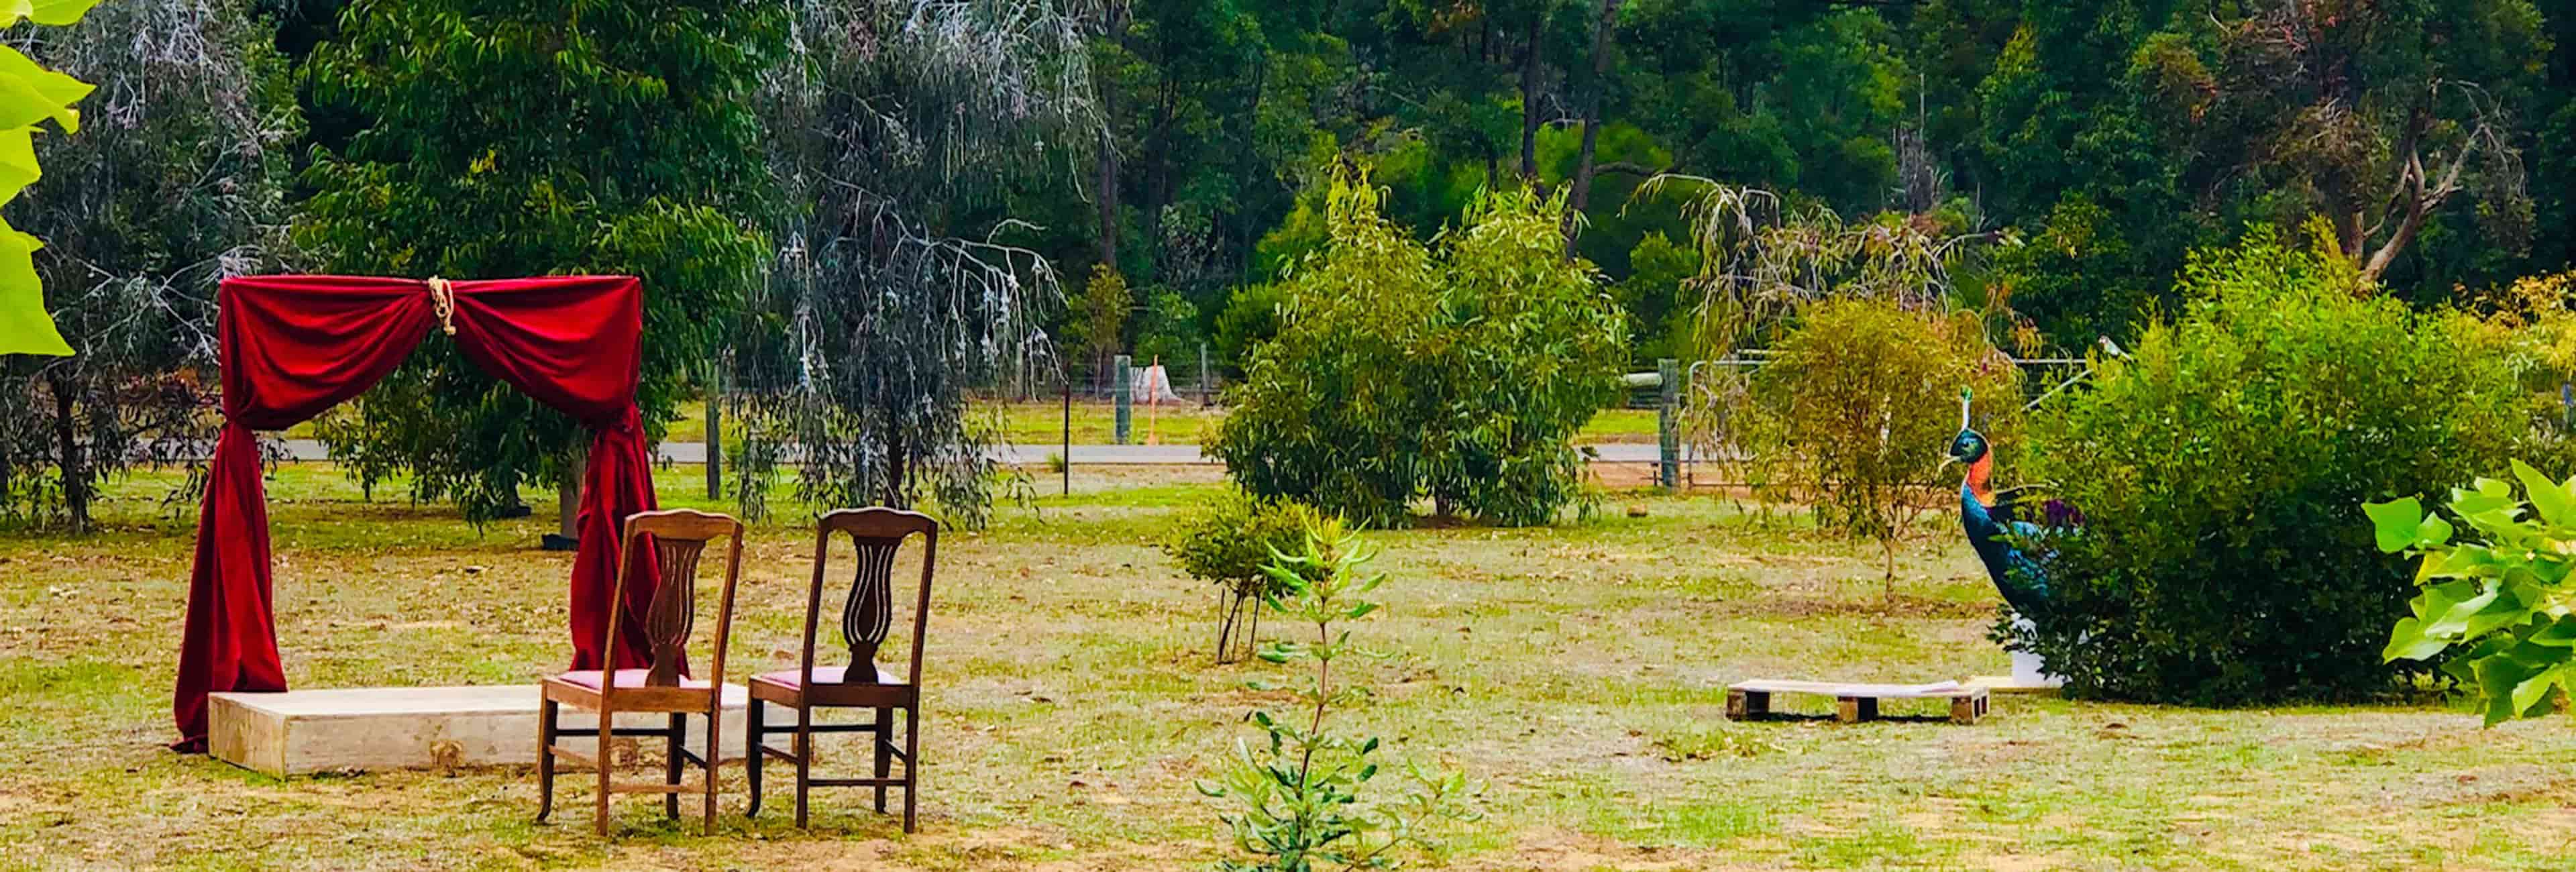 Two chairs placed in front of decorative curtains in a field.